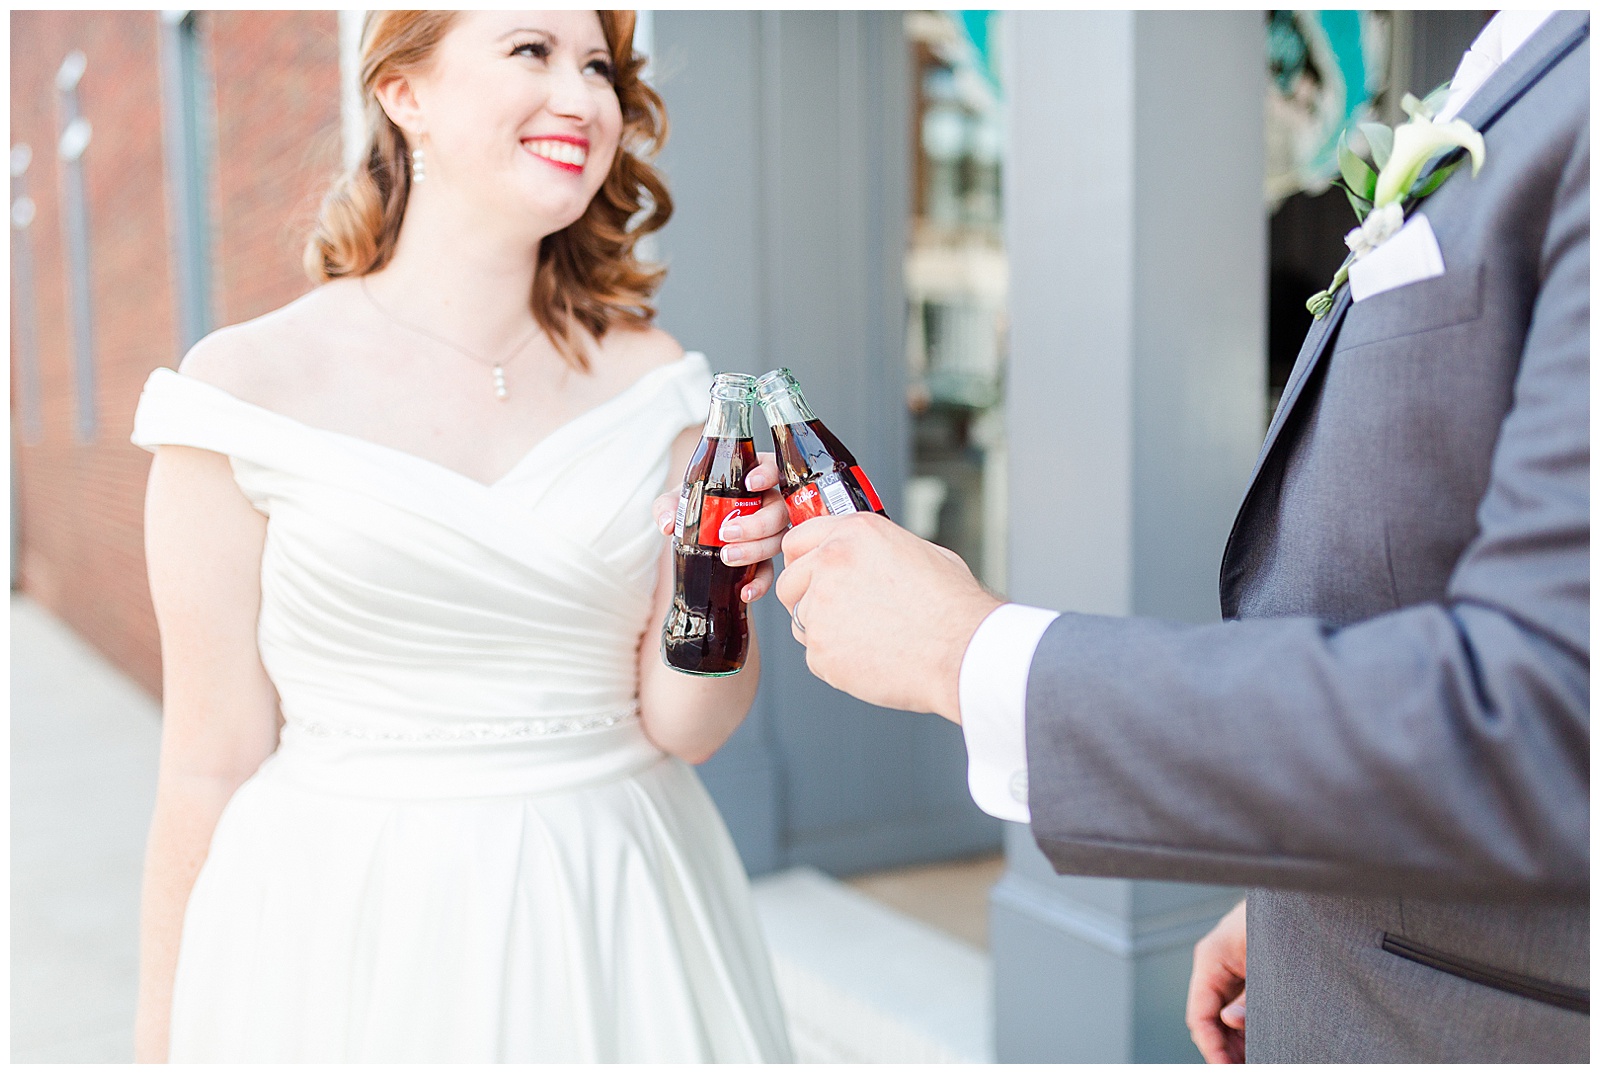 Adorable Share a Coke Bride and Groom Portraits of Red Haired Bride at her 1940s Modern Vintage Wedding in Charlotte, NC | check out the full wedding at KevynDixonPhoto.com